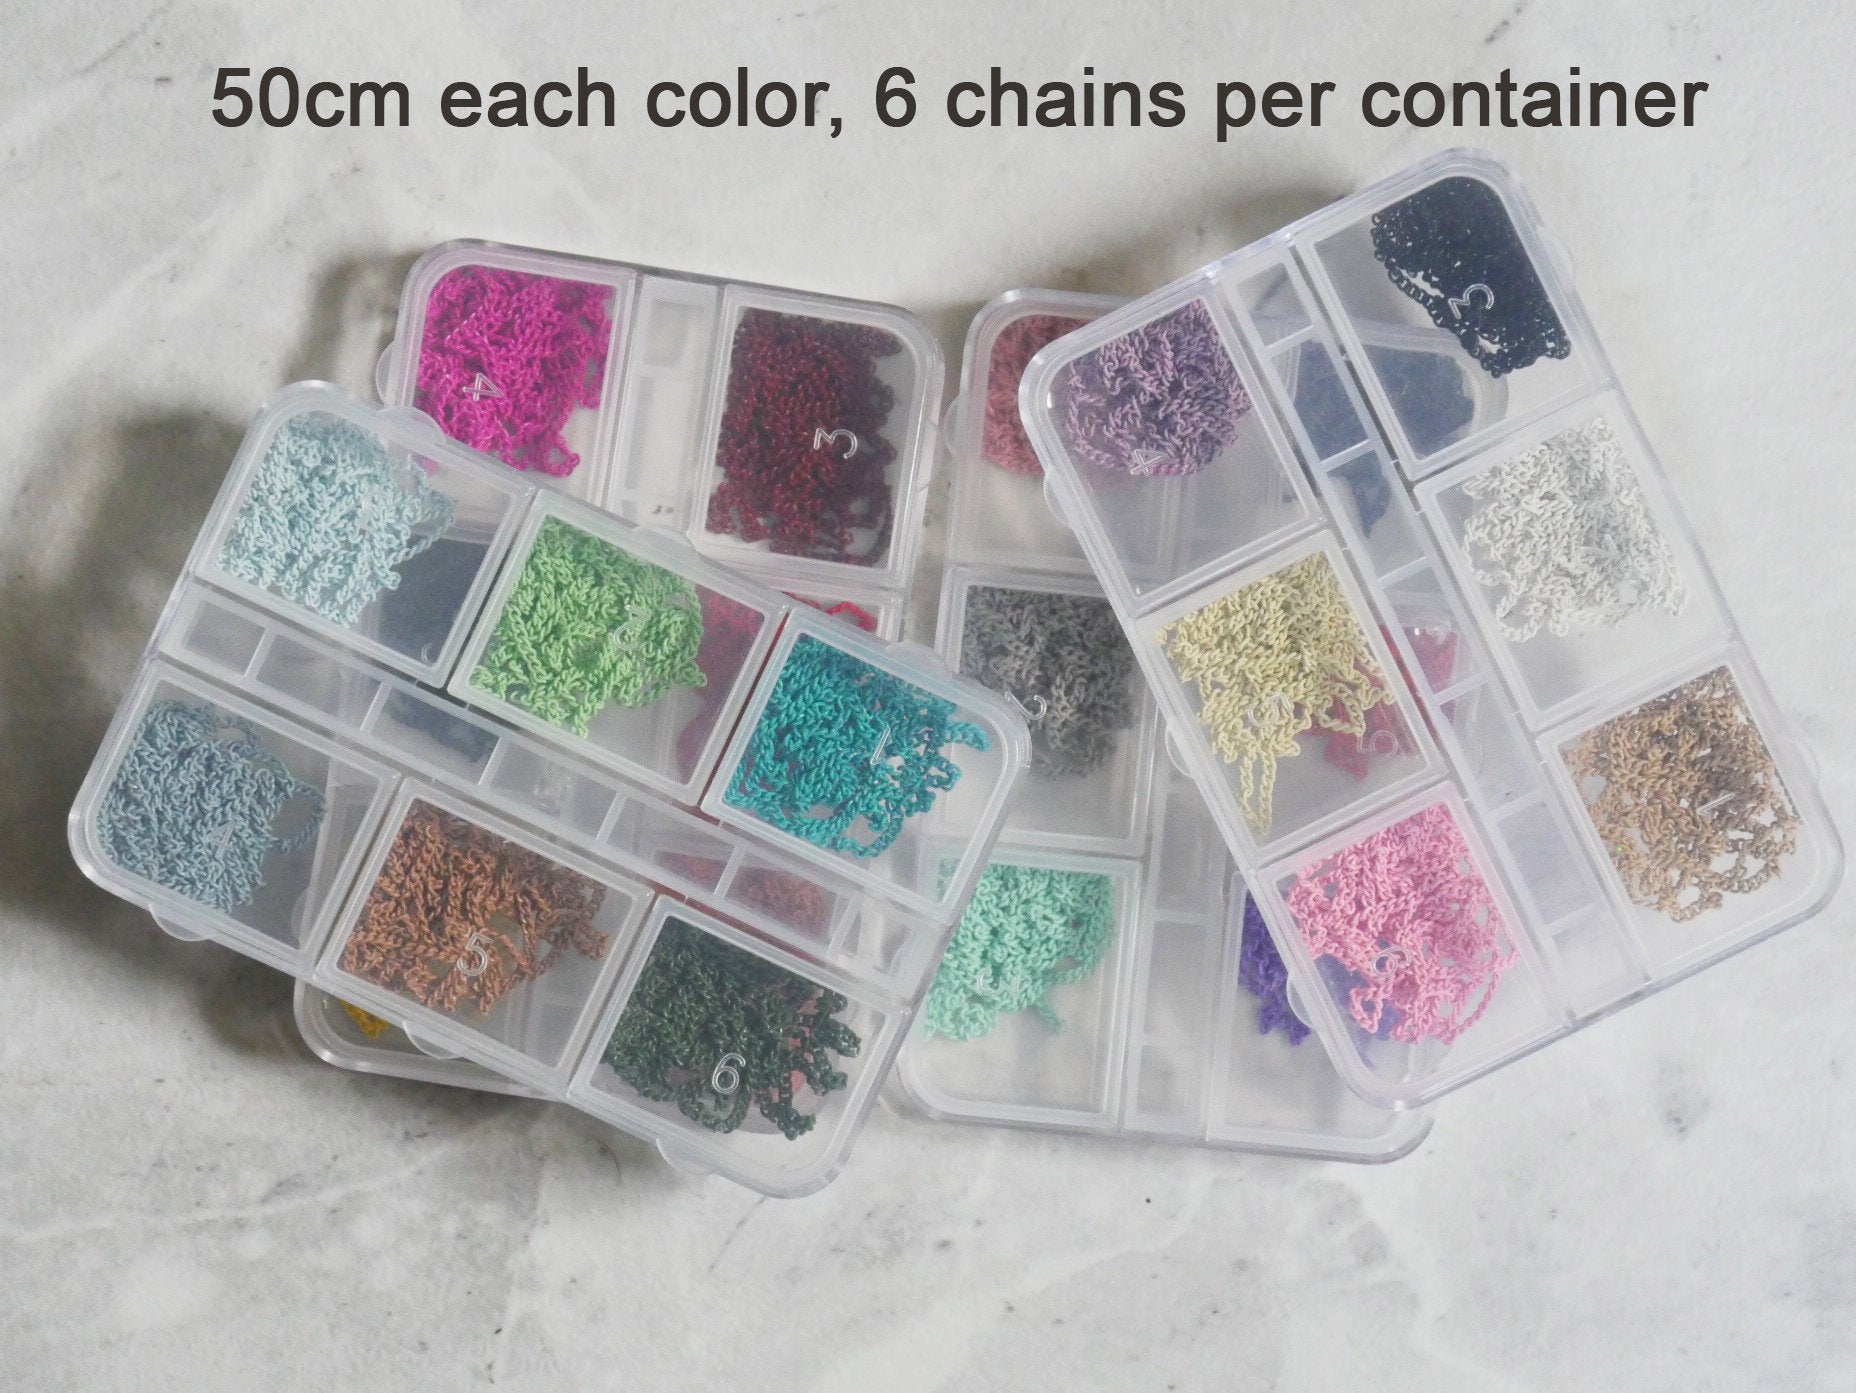 Metallic Steel Chain Punk Style for 3D Nail/ Multi color Creative Nail supply and Crafts Making/ Nail Chains Decals 6x50cm